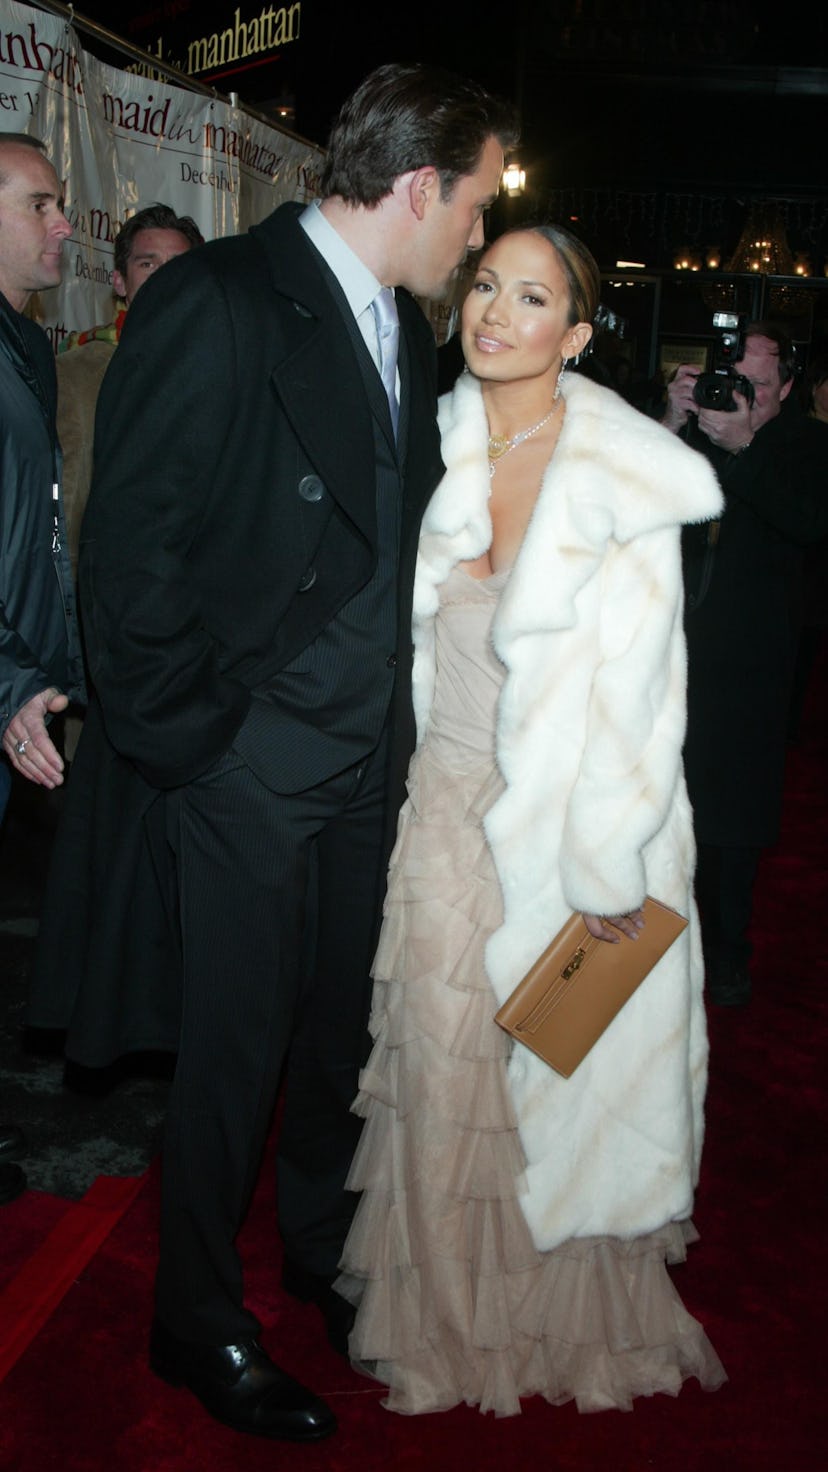 Jennifer Lopez and Ben Affleck at the Maid in Manhattan premiere in New York